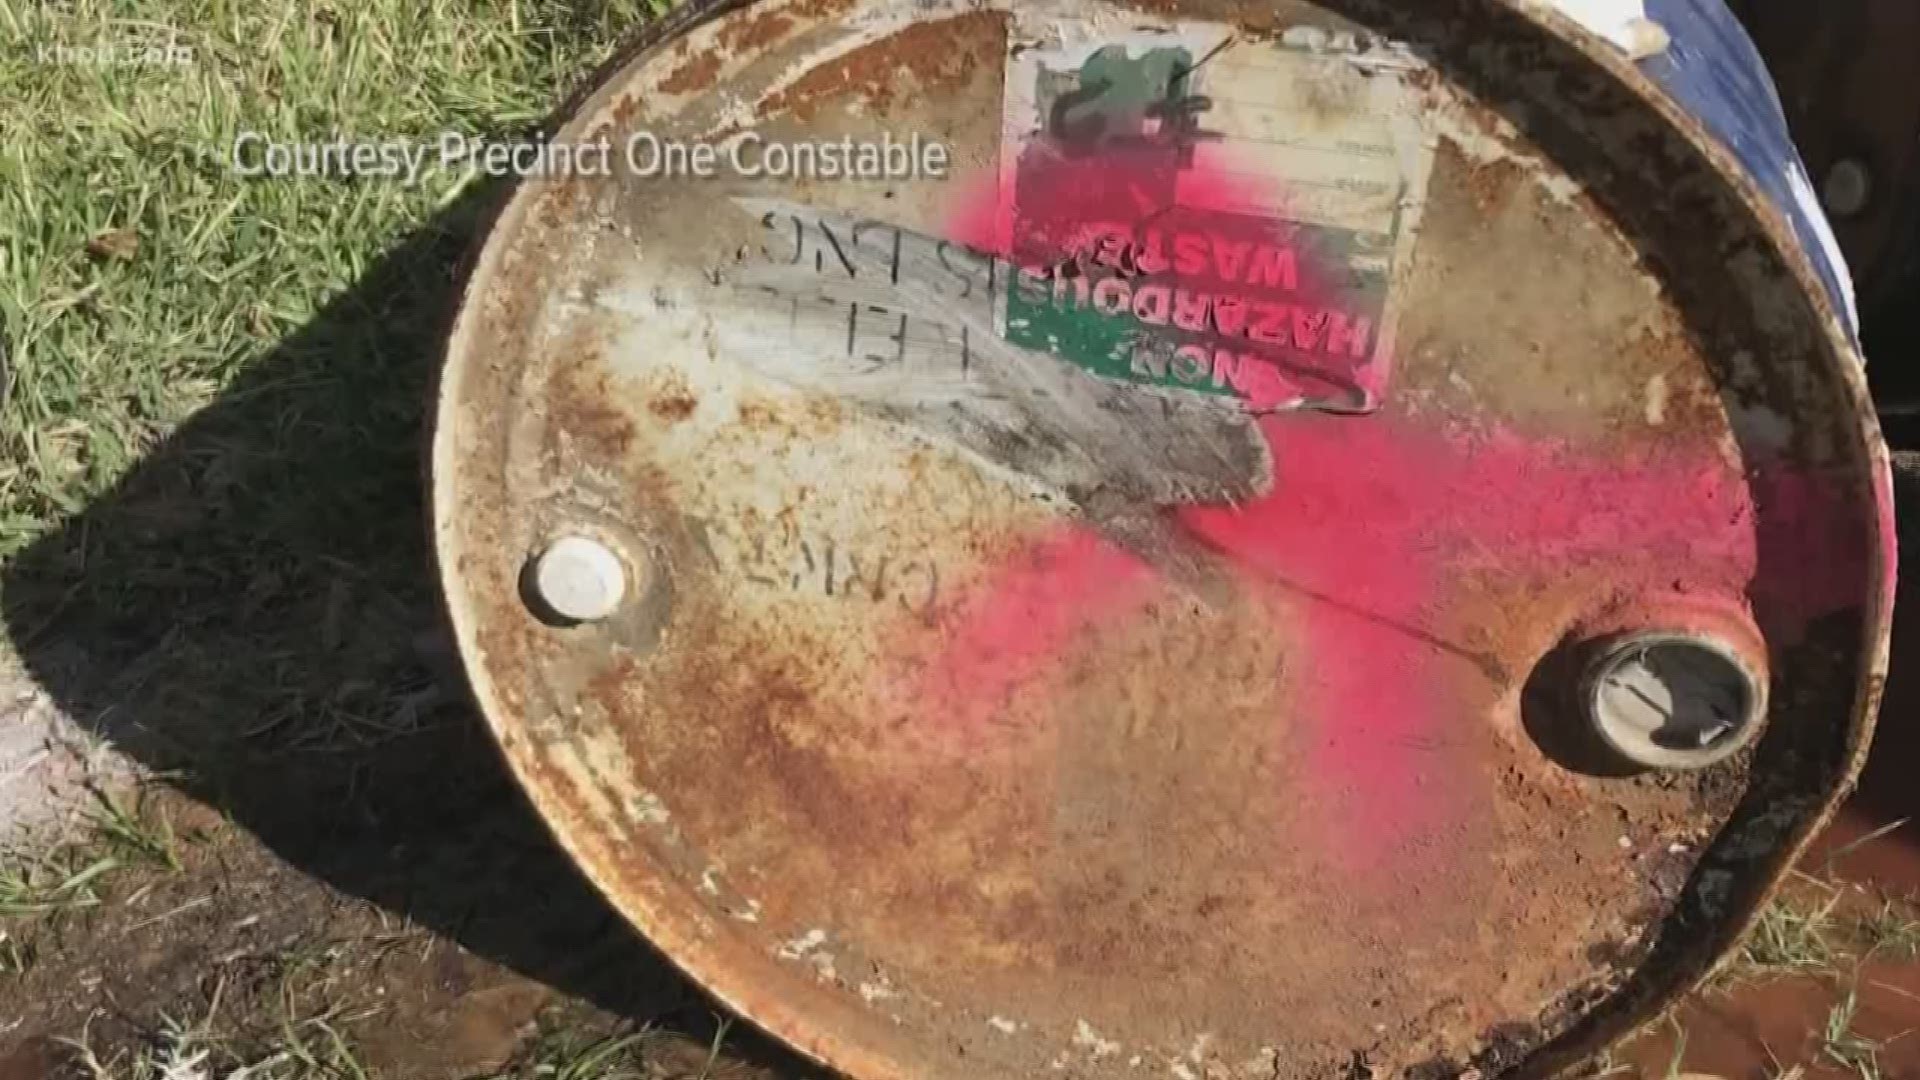 More than a dozen barrels containing chemicals were found illegally dumped in east Houston and it's going to cost the city thousands of dollars to clean up.